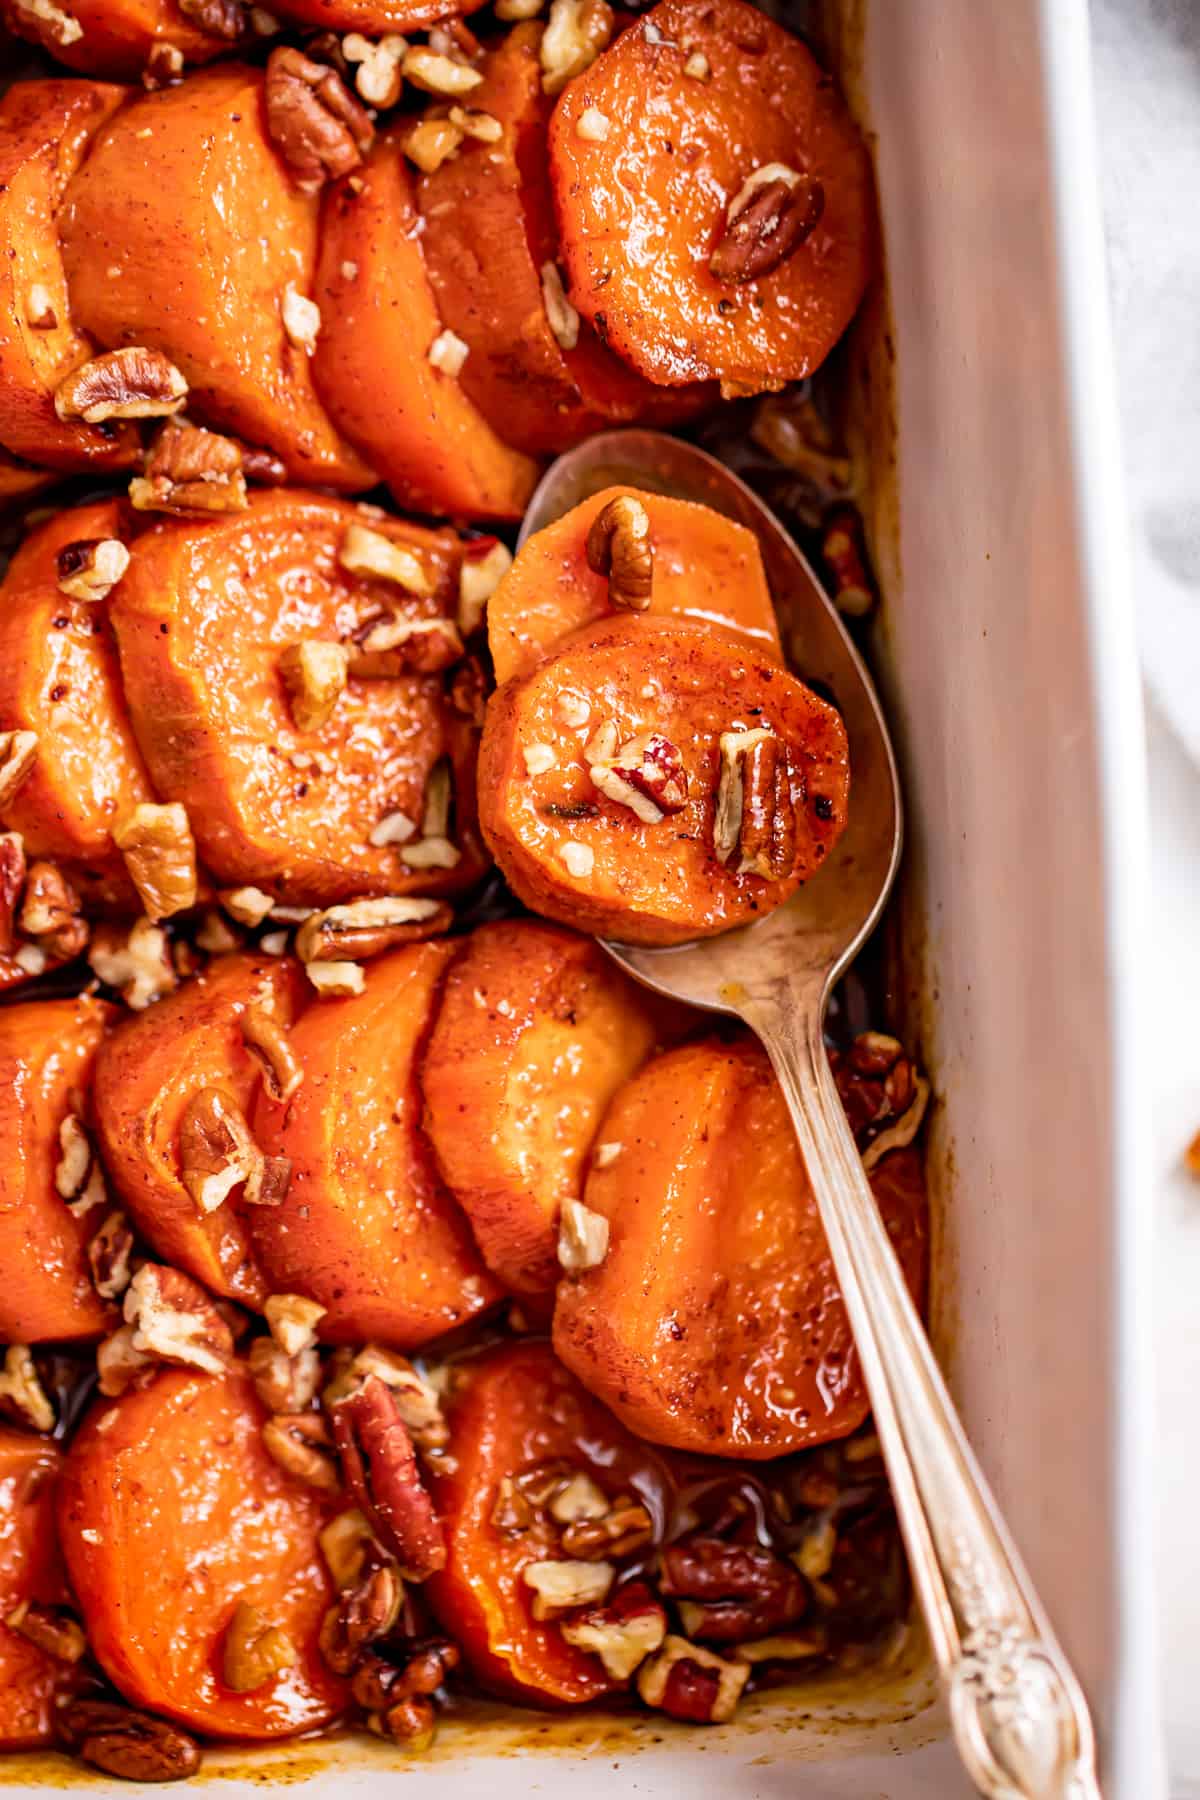 Baked Southern candied yams with pecans on top.